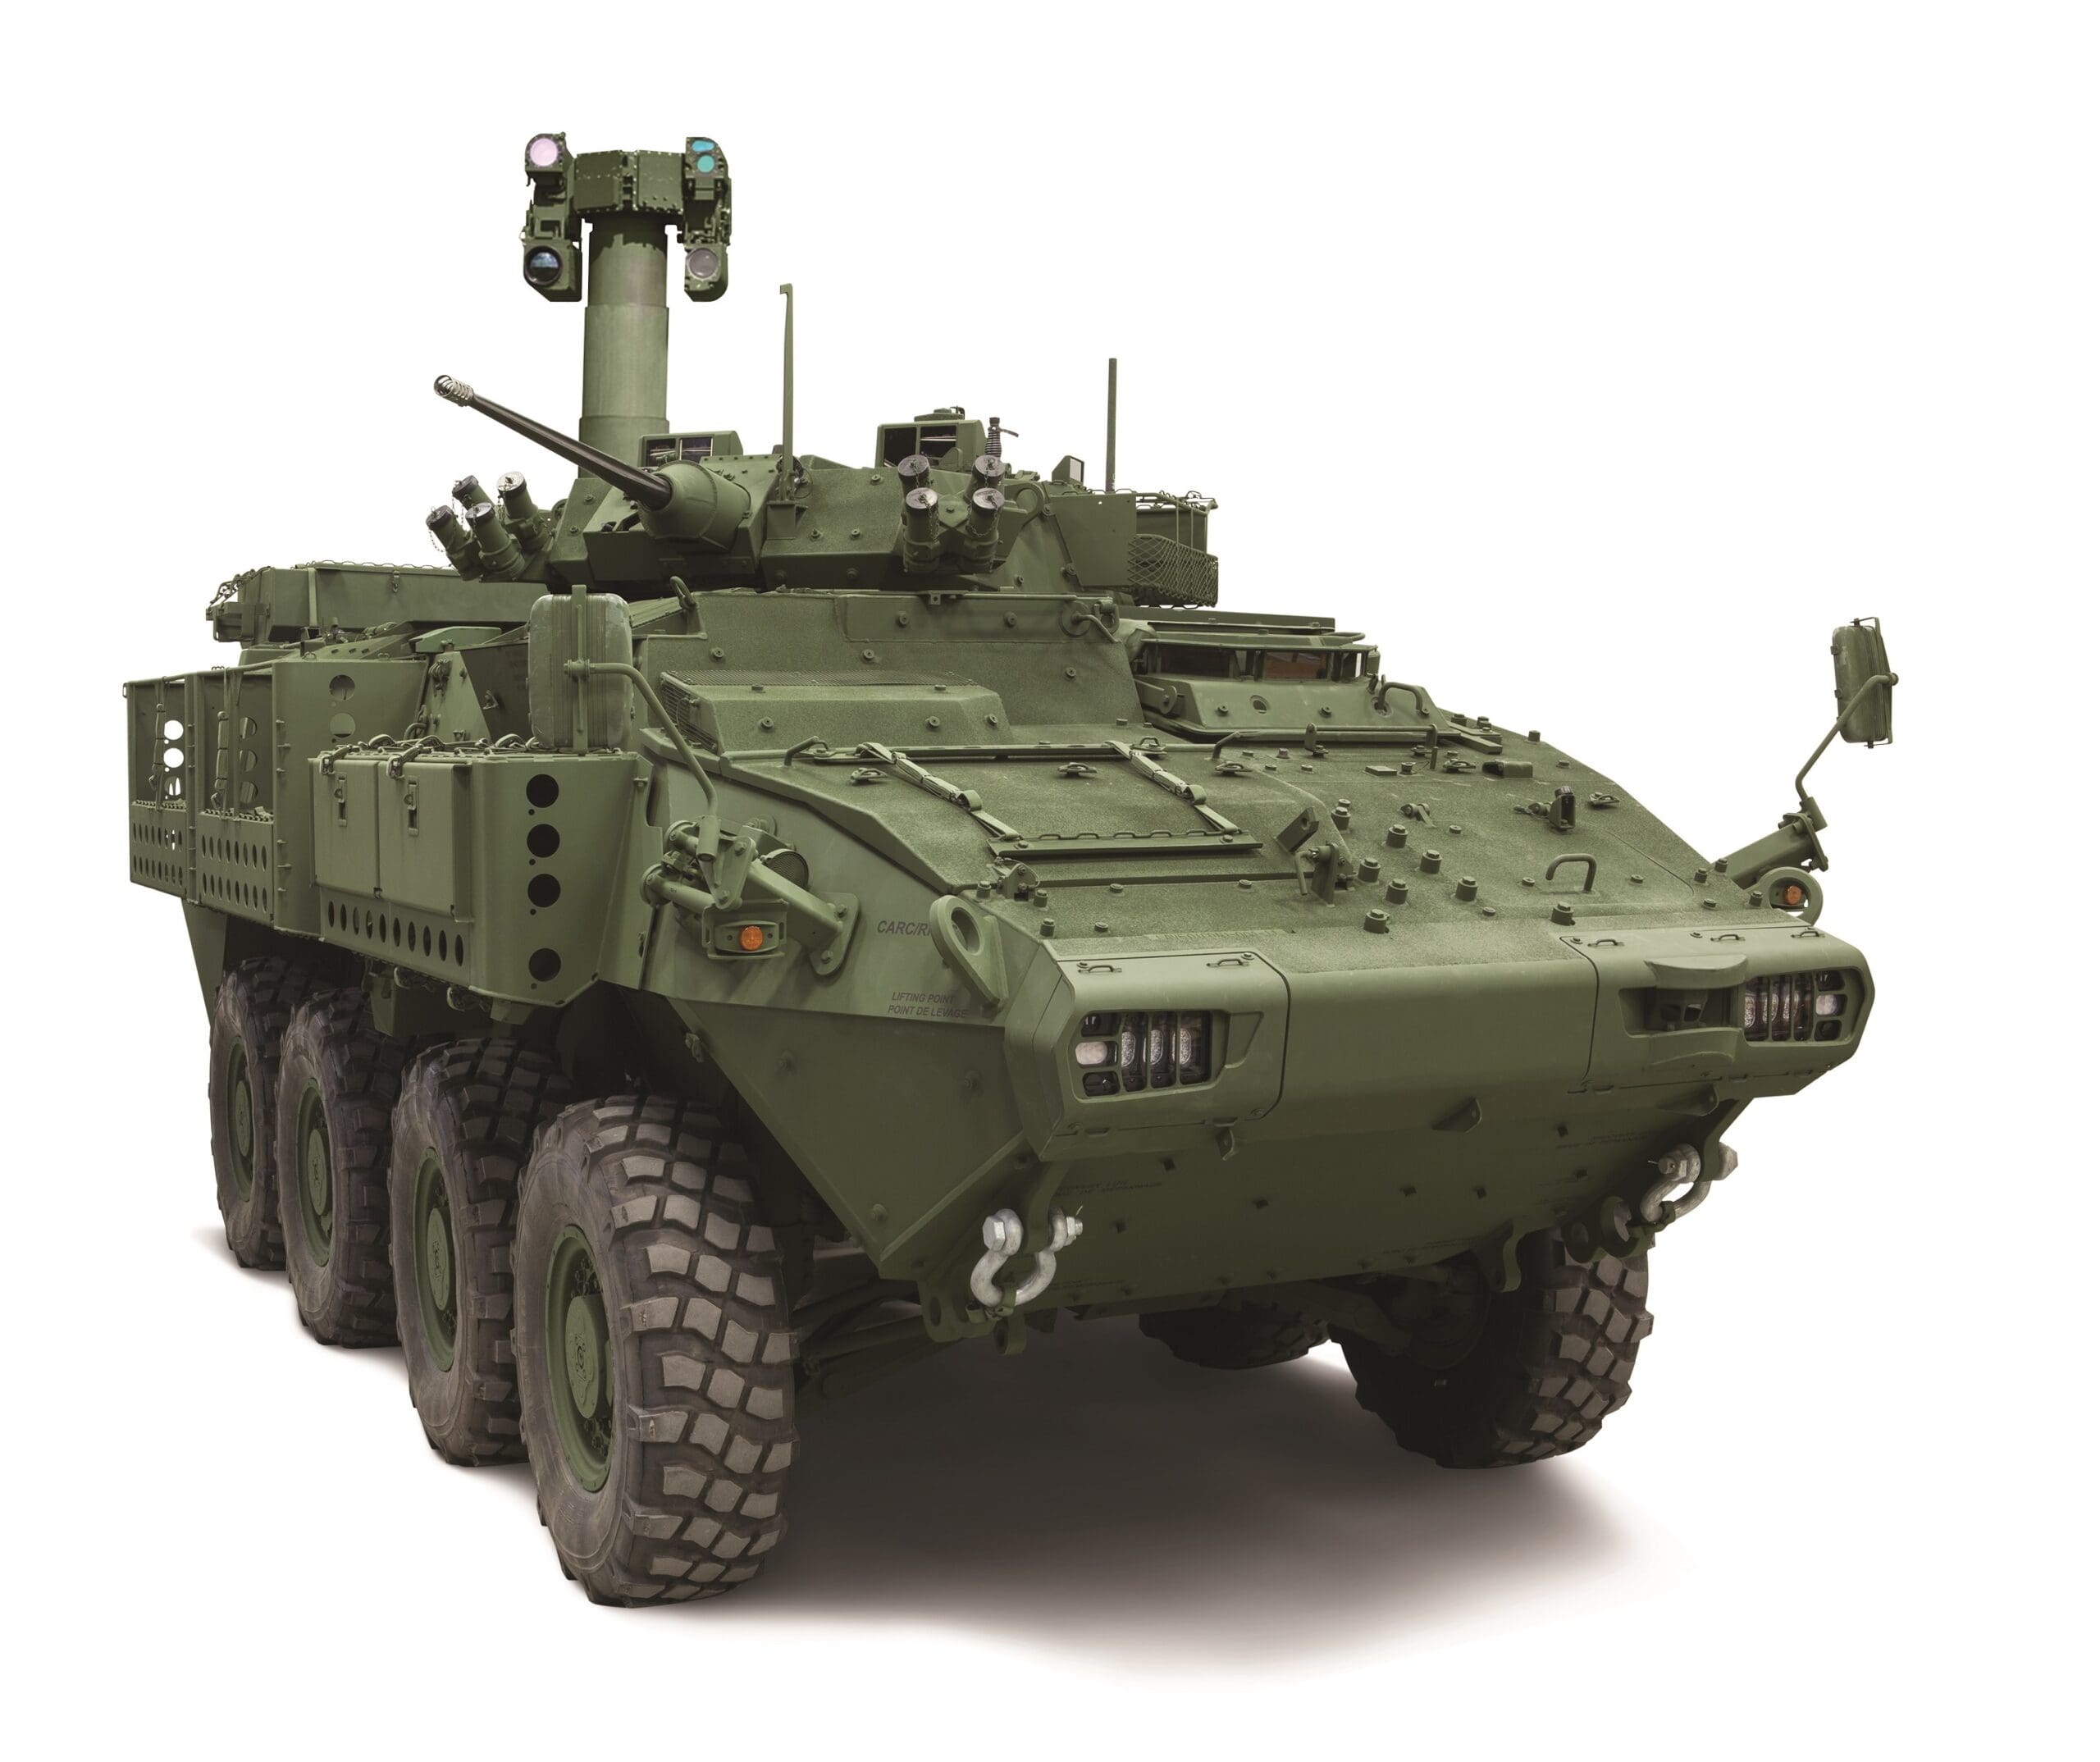 Lav 6 Lrss From Gd Fitted With Galvion Swbp Image Courtesy Of Gdls Canada Scaled 